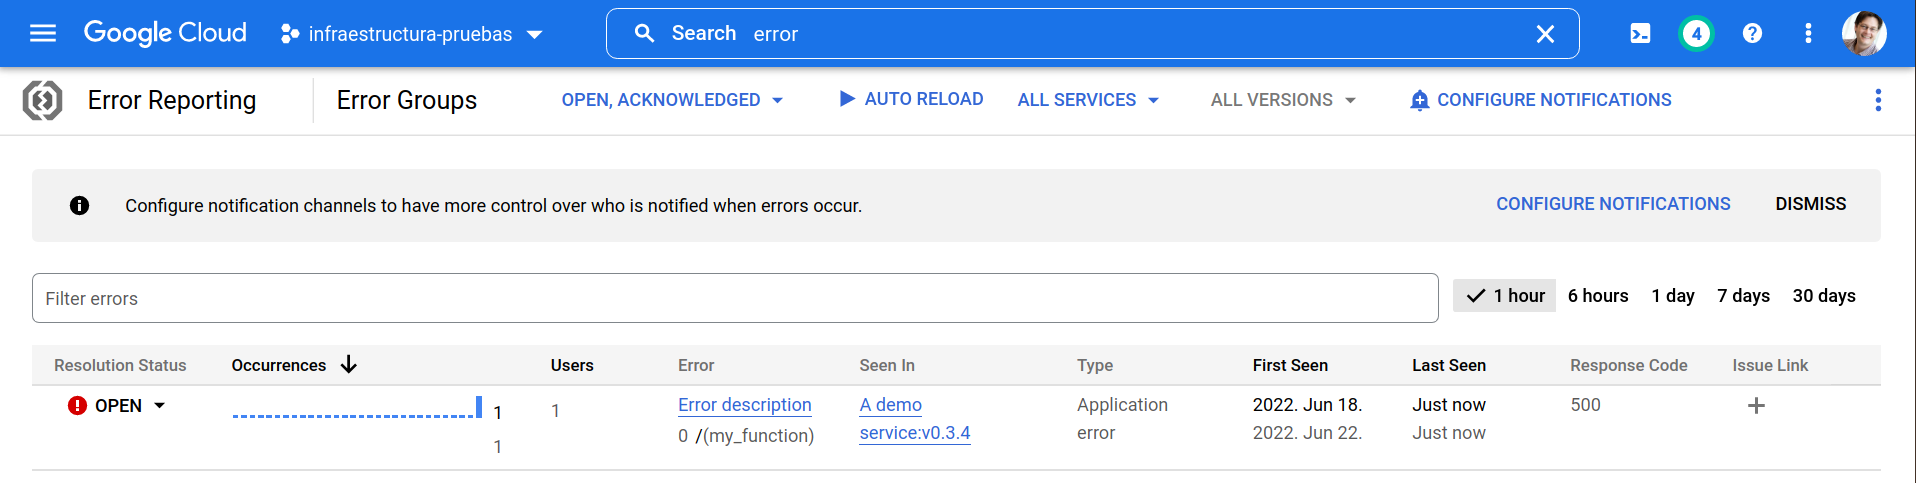 Screenshot of the message as listed in the Google Error Reporting UI